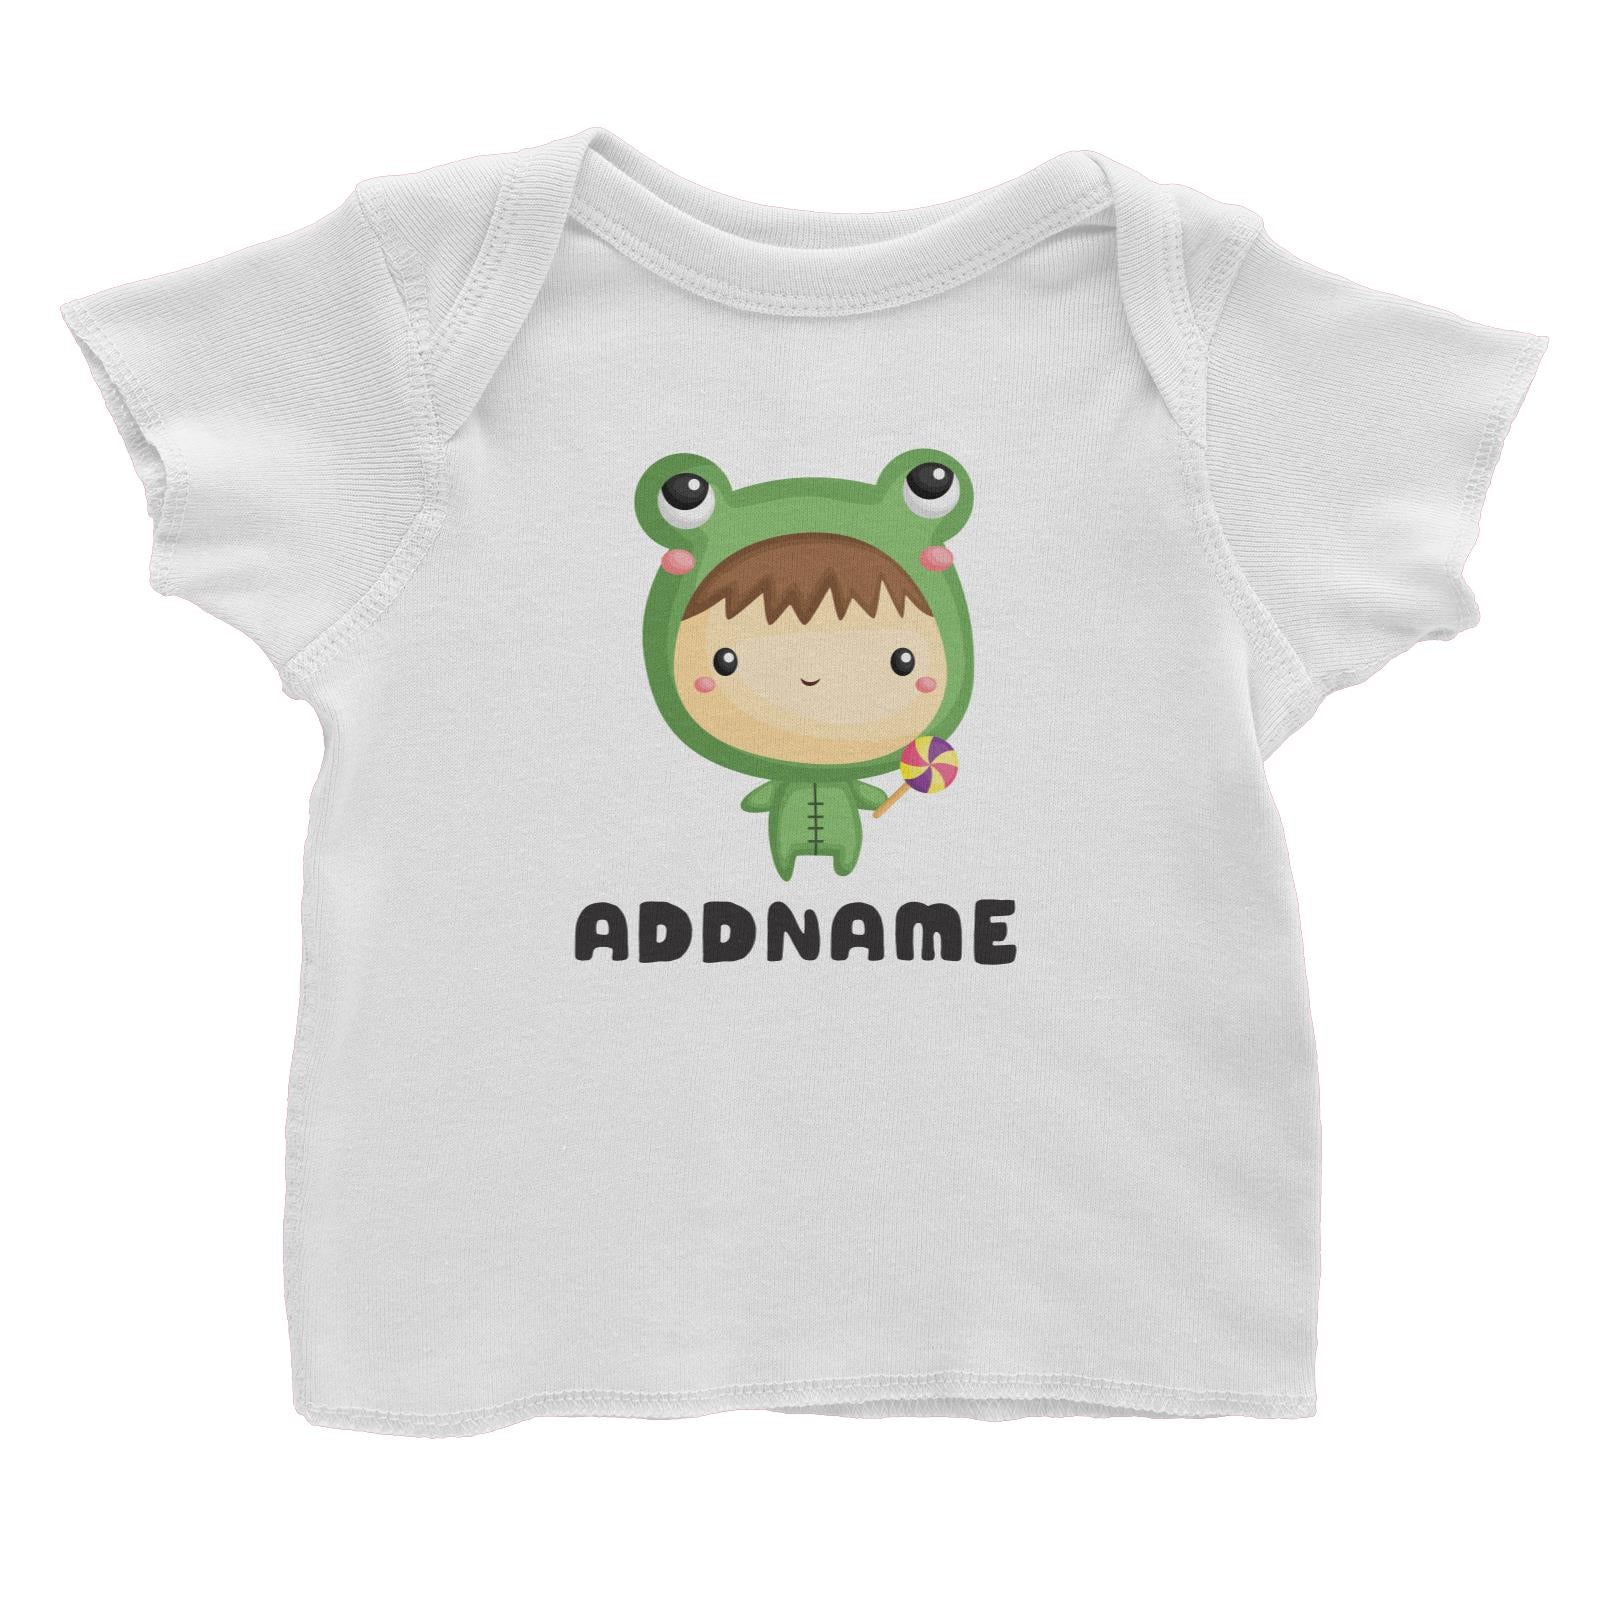 Birthday Frog Baby Boy Wearing Frog Suit Holding Lolipop Addname Baby T-Shirt